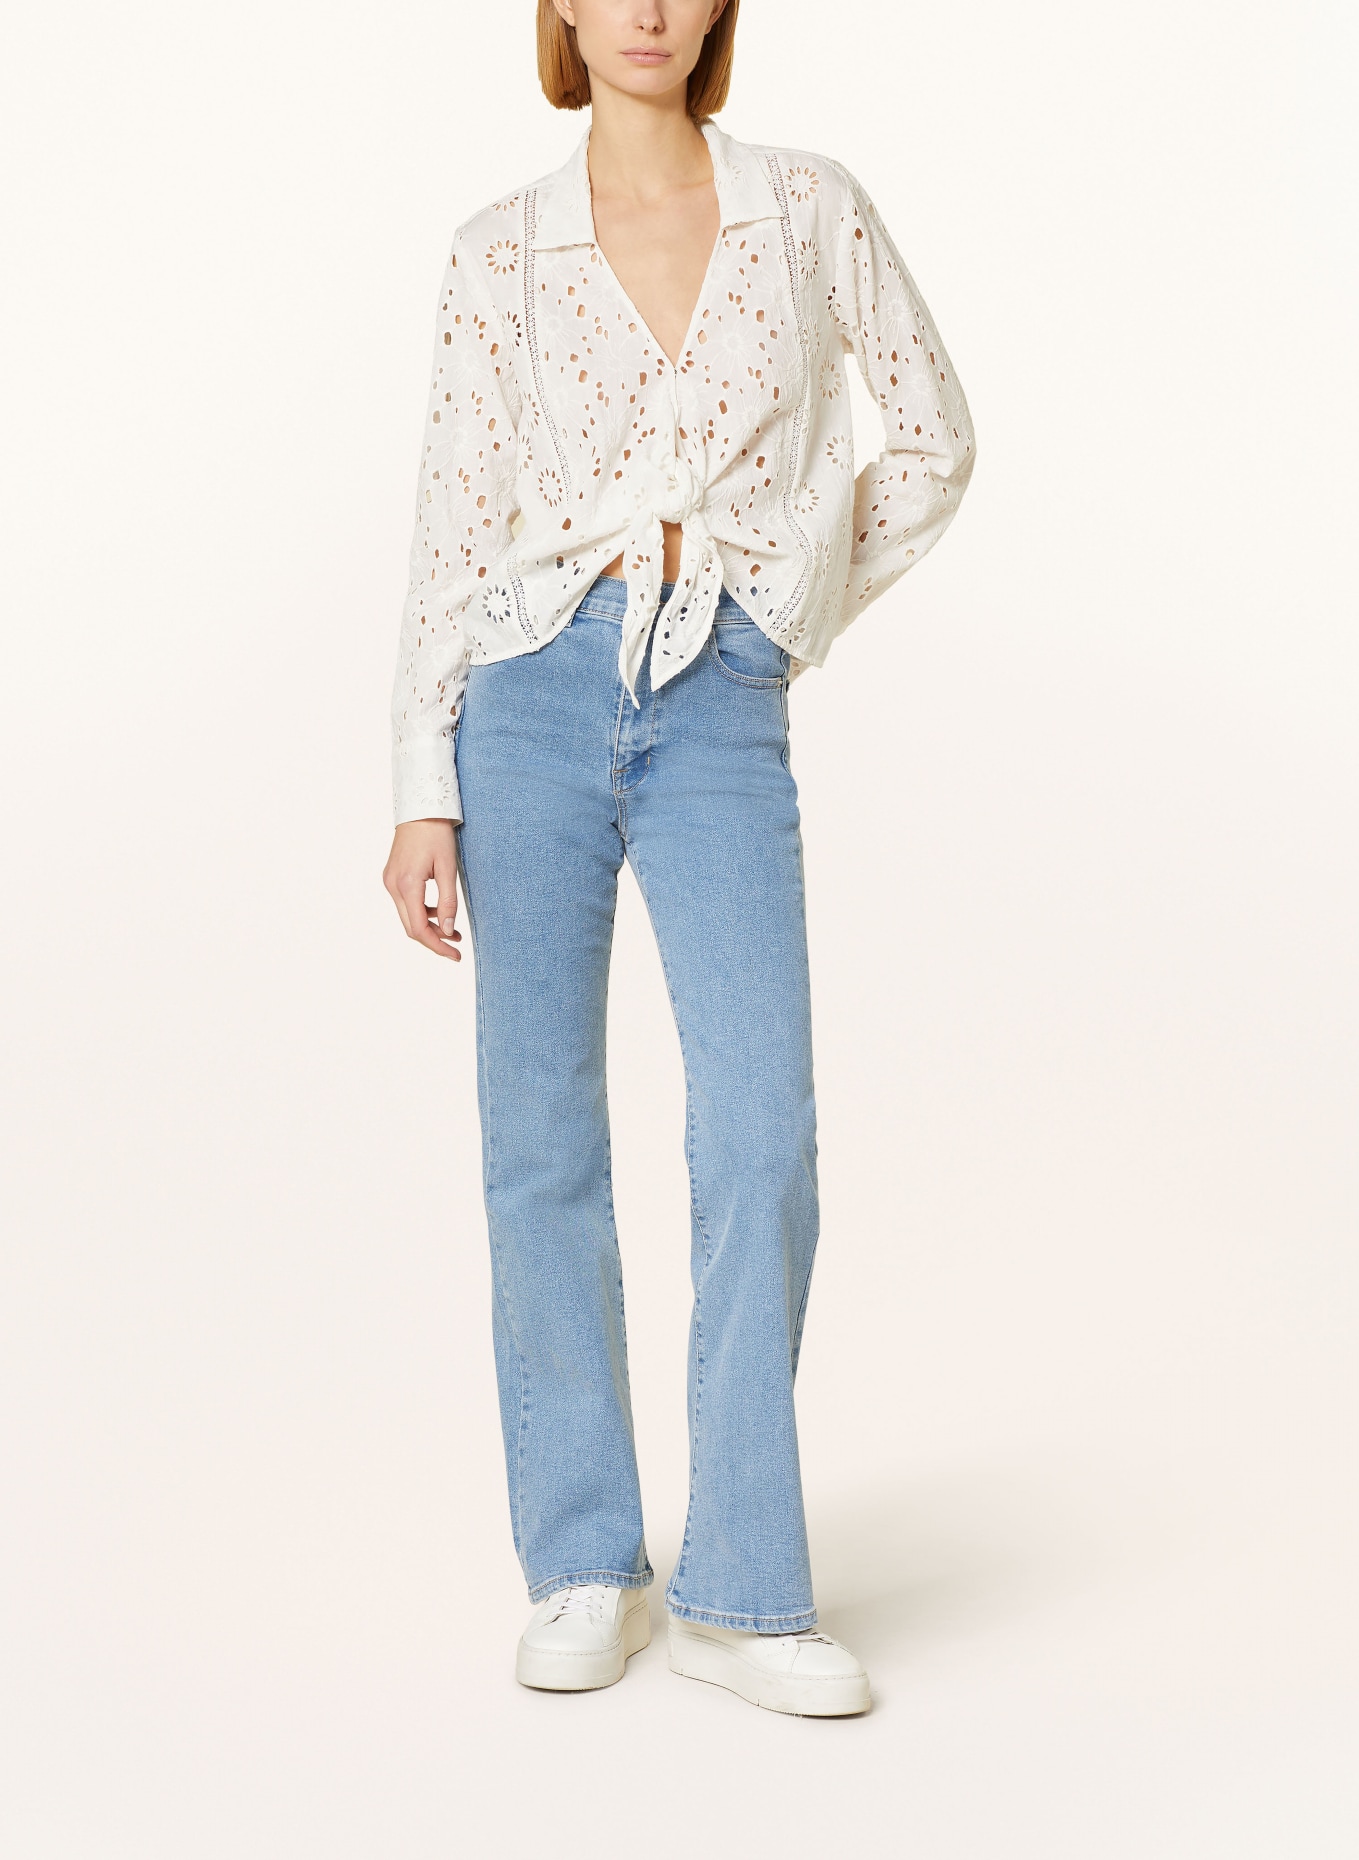 Princess GOES HOLLYWOOD Shirt blouse made of broderie anglaise, Color: WHITE (Image 2)